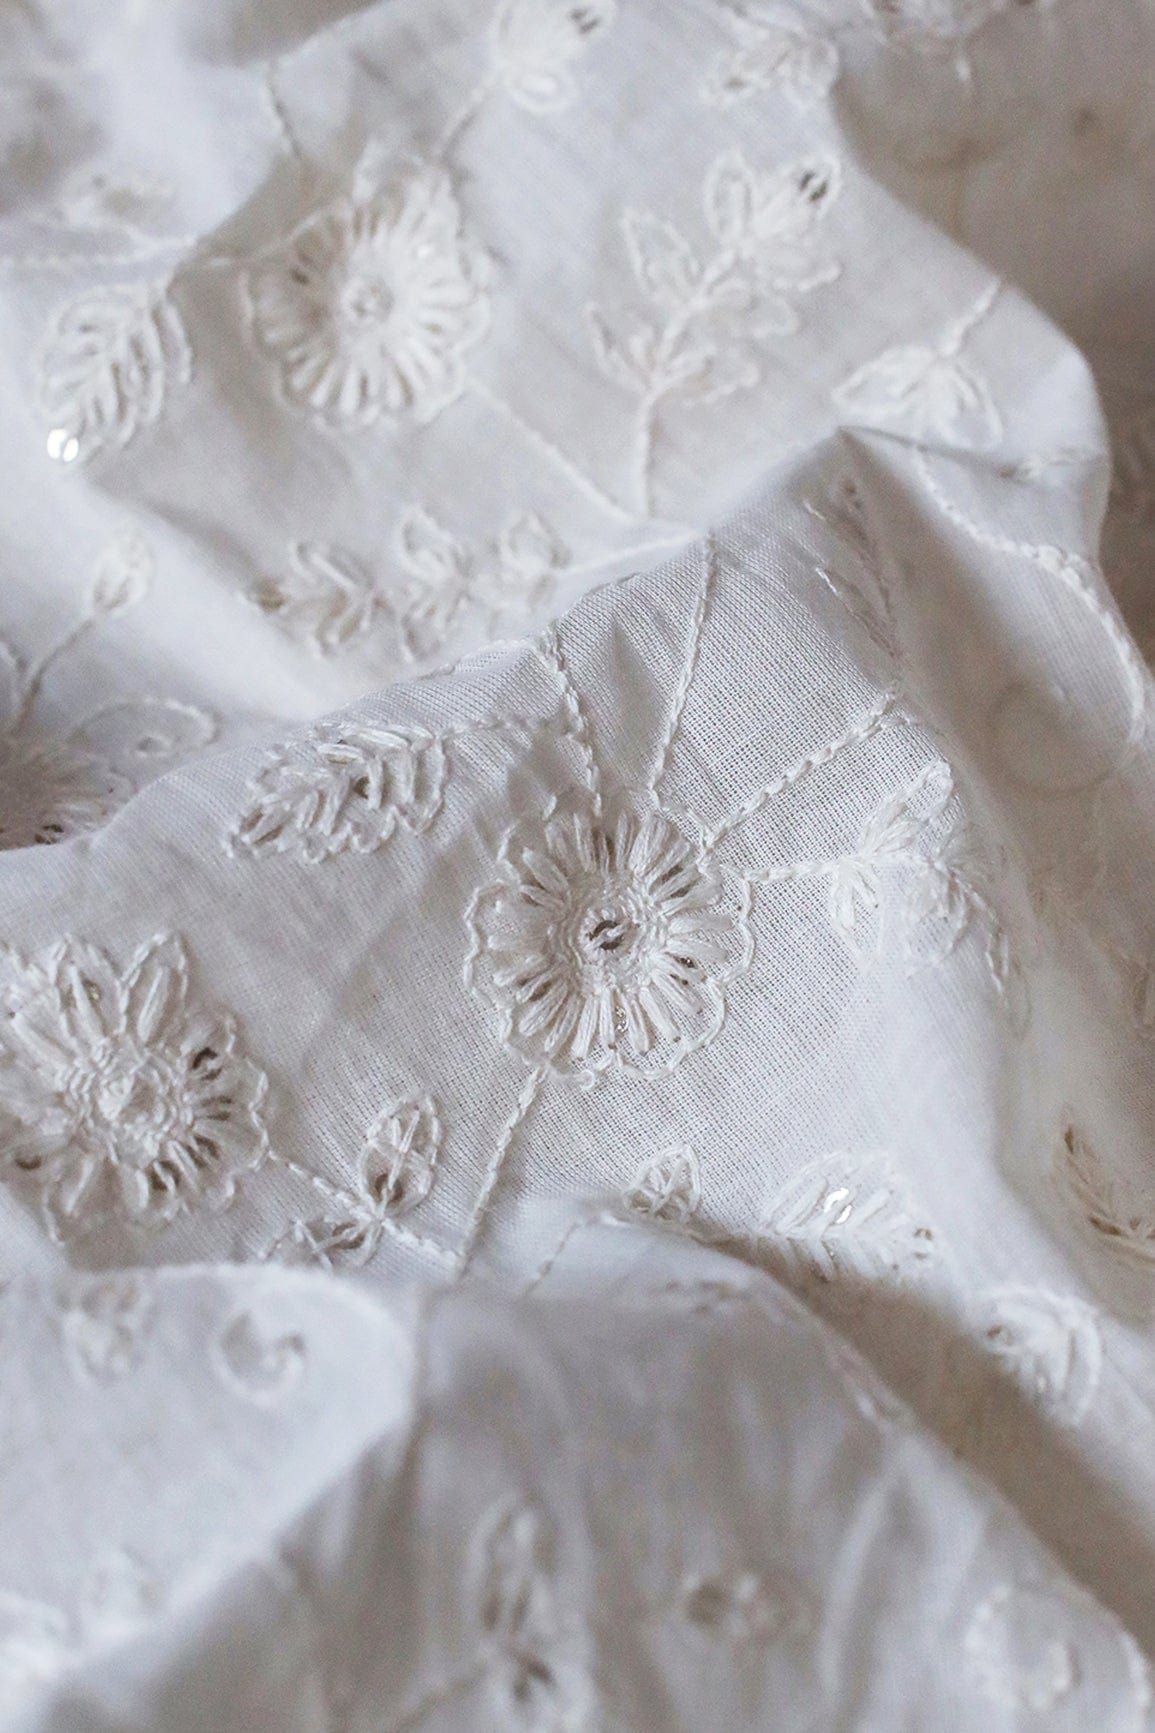 doeraa Embroidery Fabrics Beautiful White Thread With Gold Sequins Floral Embroidery Work On White Cotton Fabric